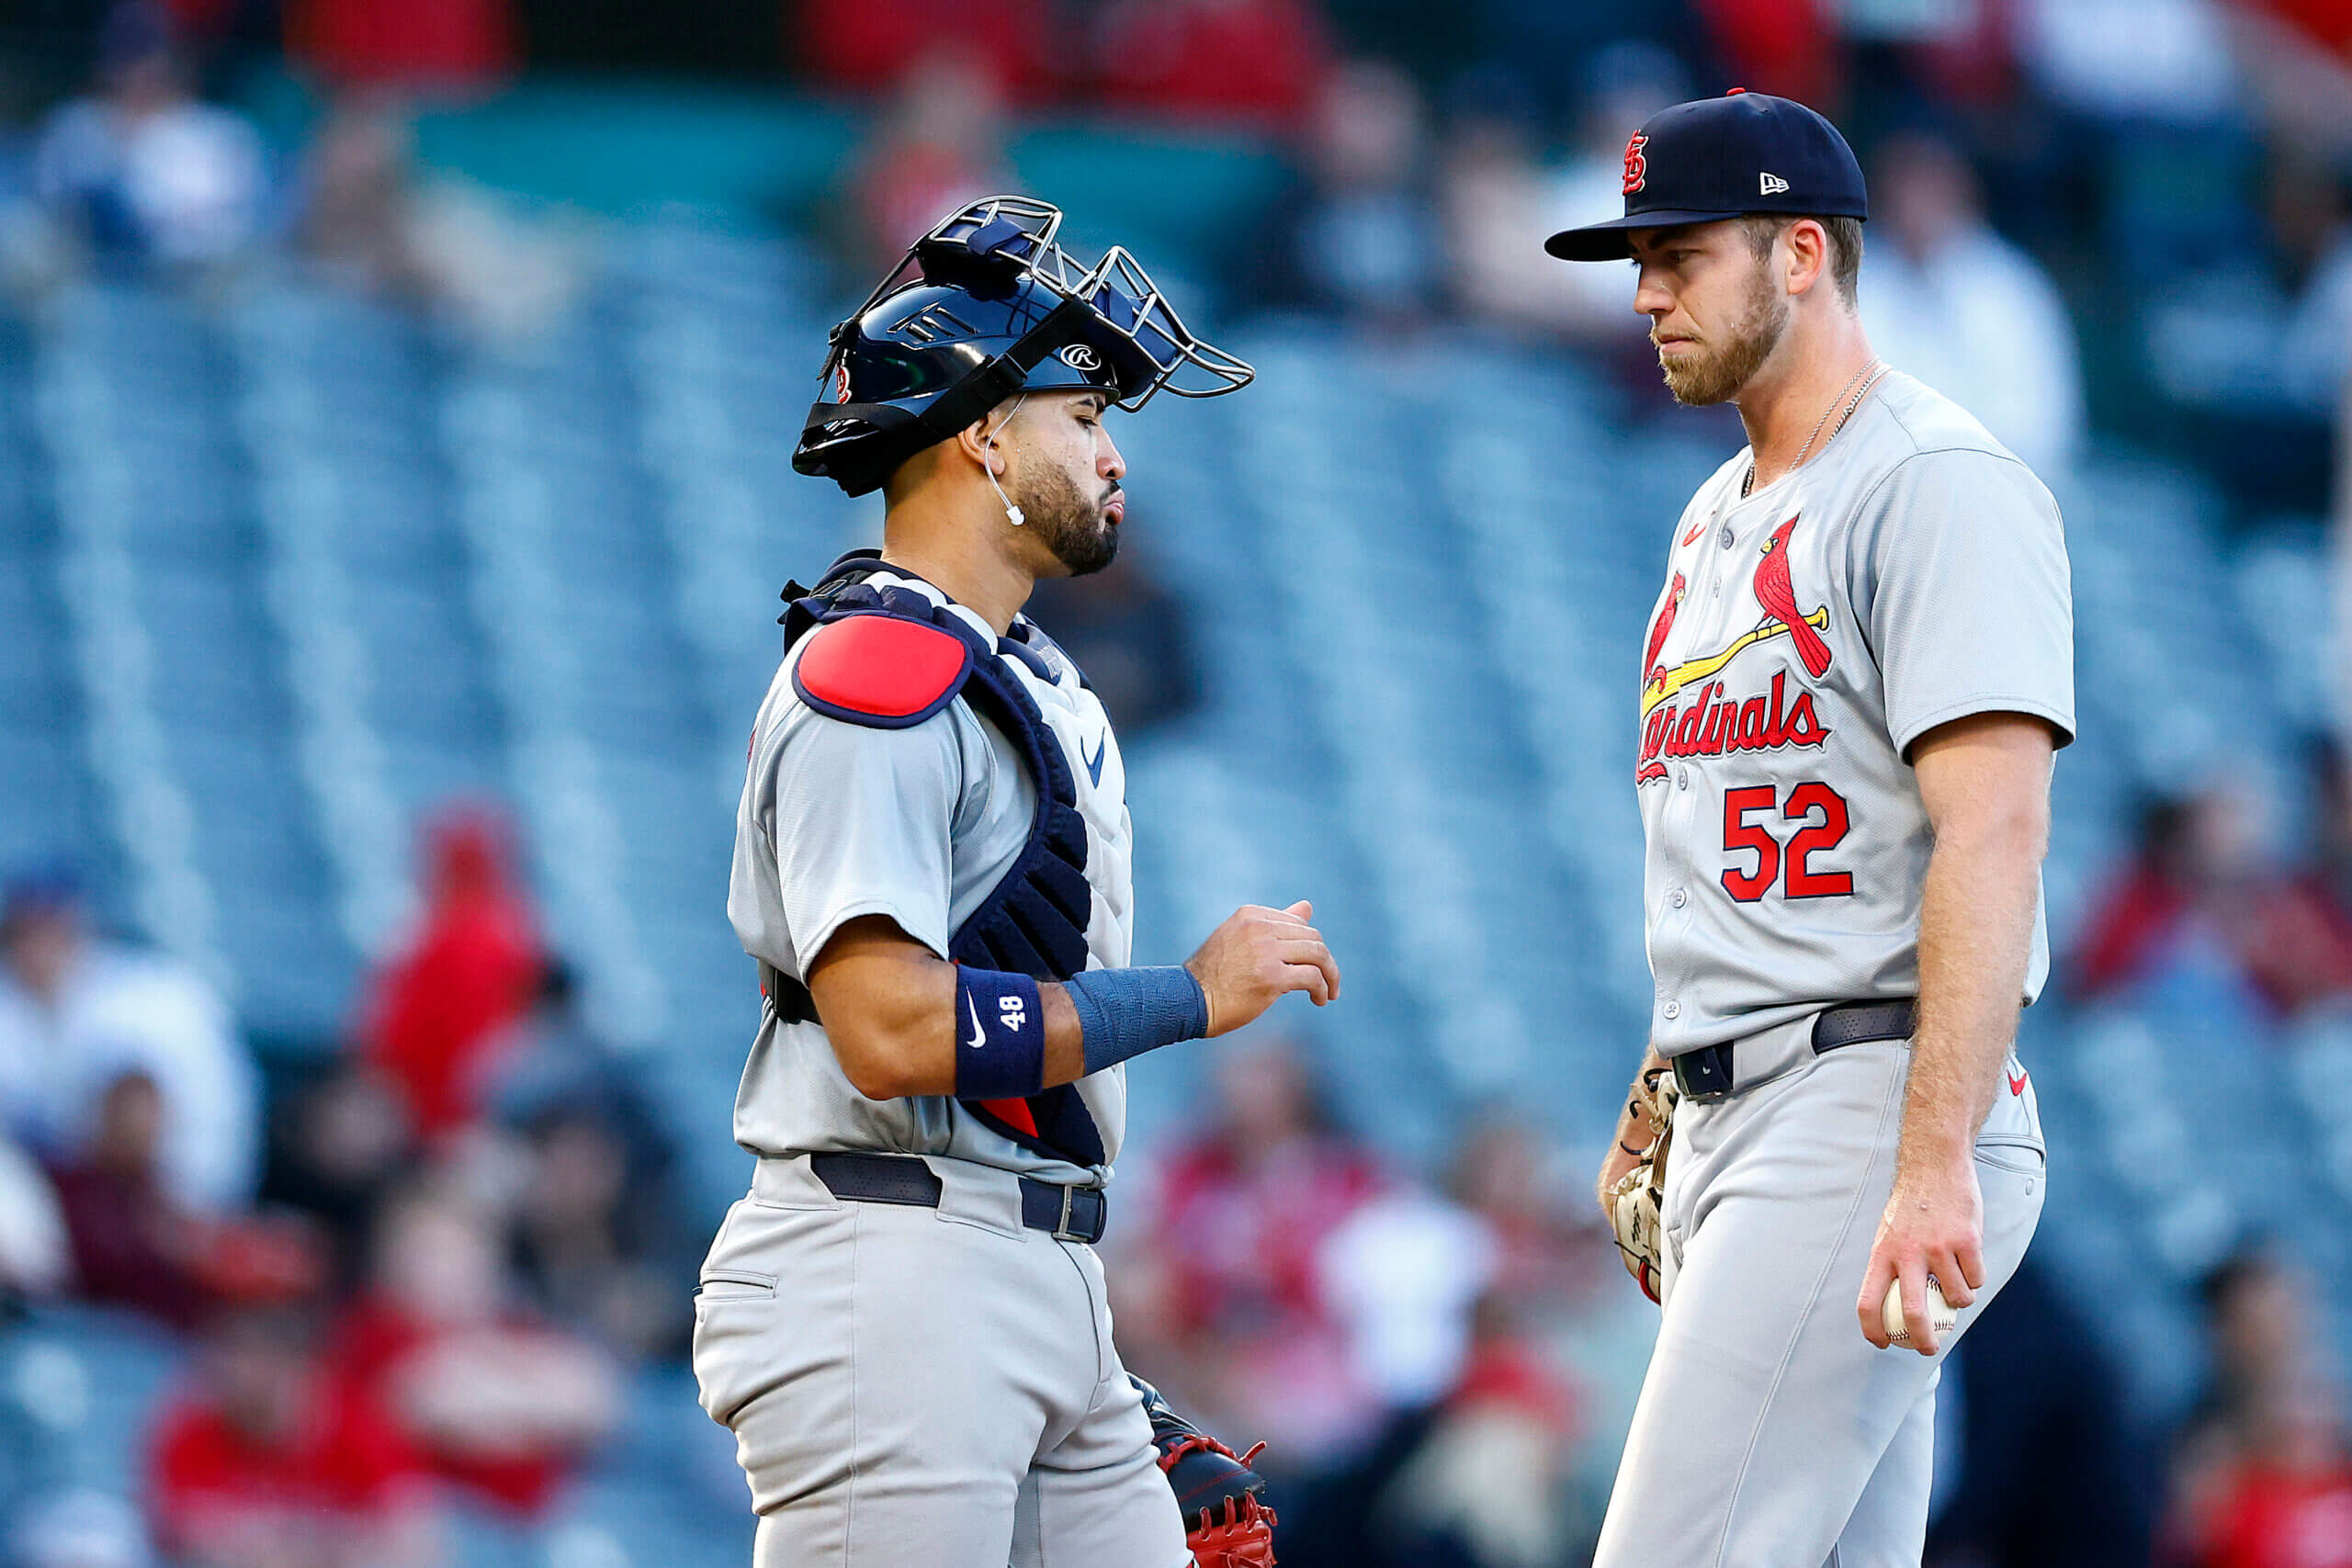 Cardinals capture series win over Angels, but roster construction concerns remain